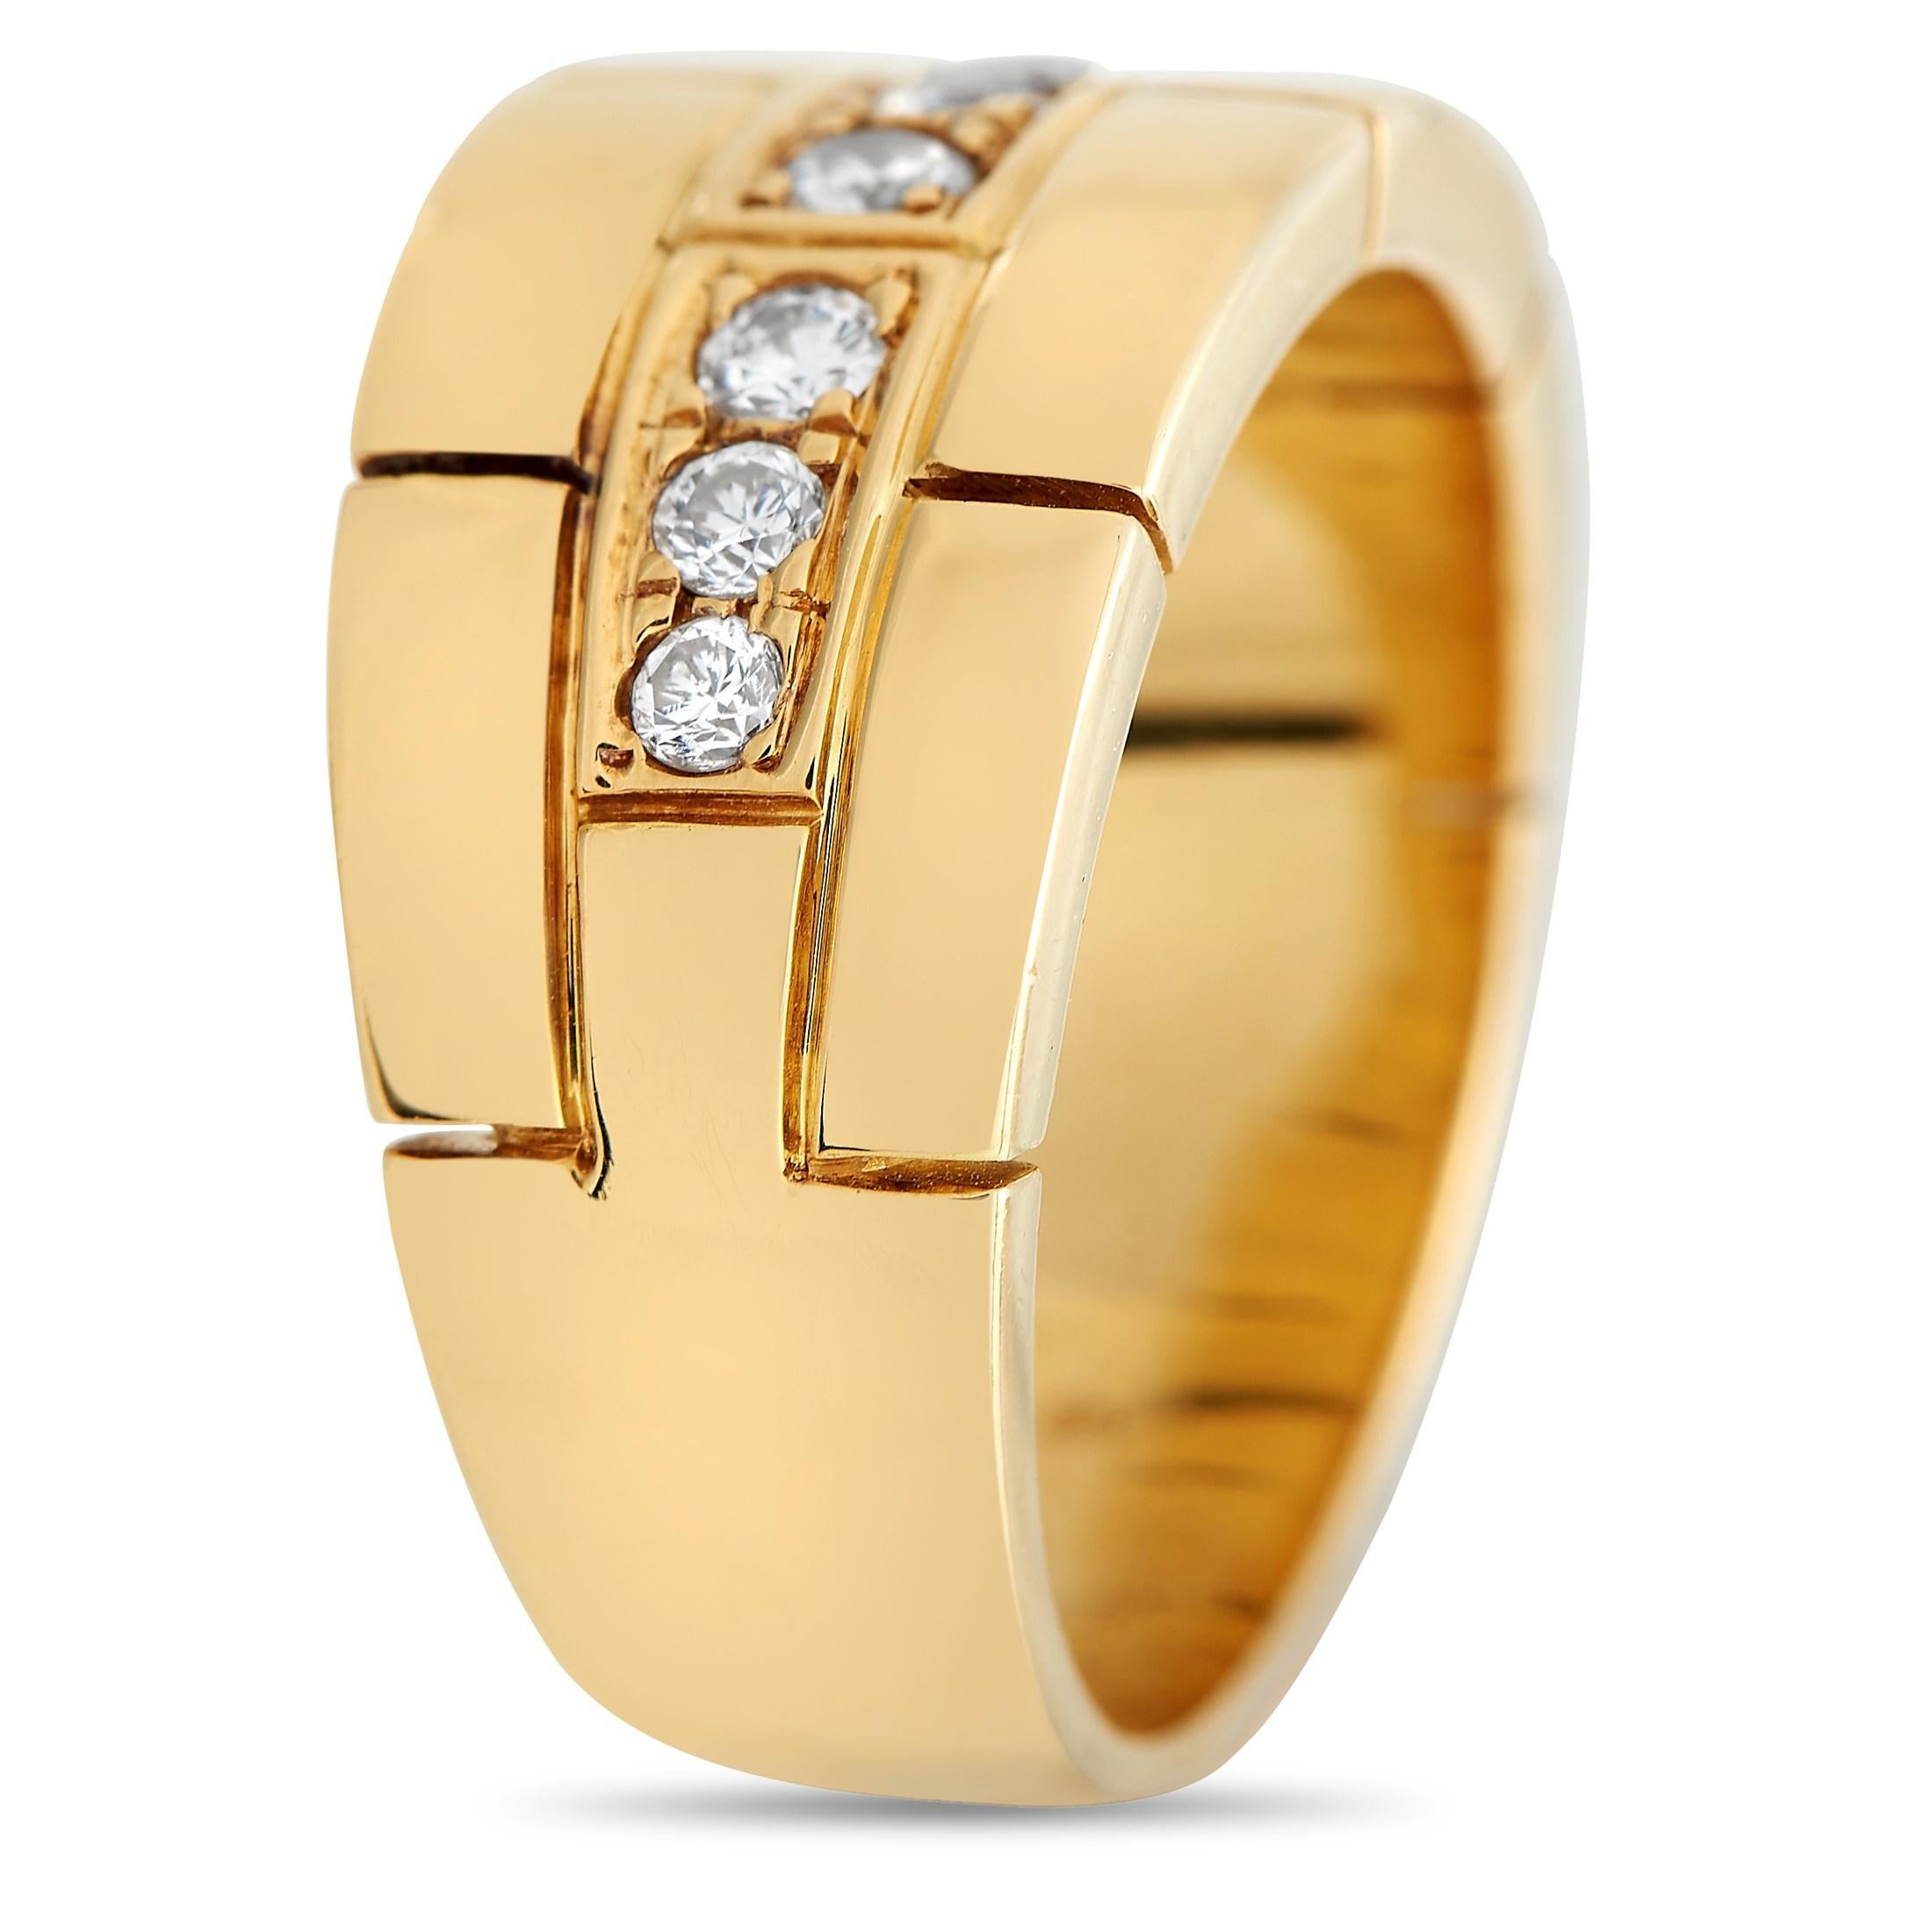 A series of inset diamonds totaling 0.40 carats make a statement at the center of this refined ring from Cartier. The 18K Yellow Gold band measures 6mm wide and includes engraved accents for added visual impact. A top height measuring 2mm gives it a